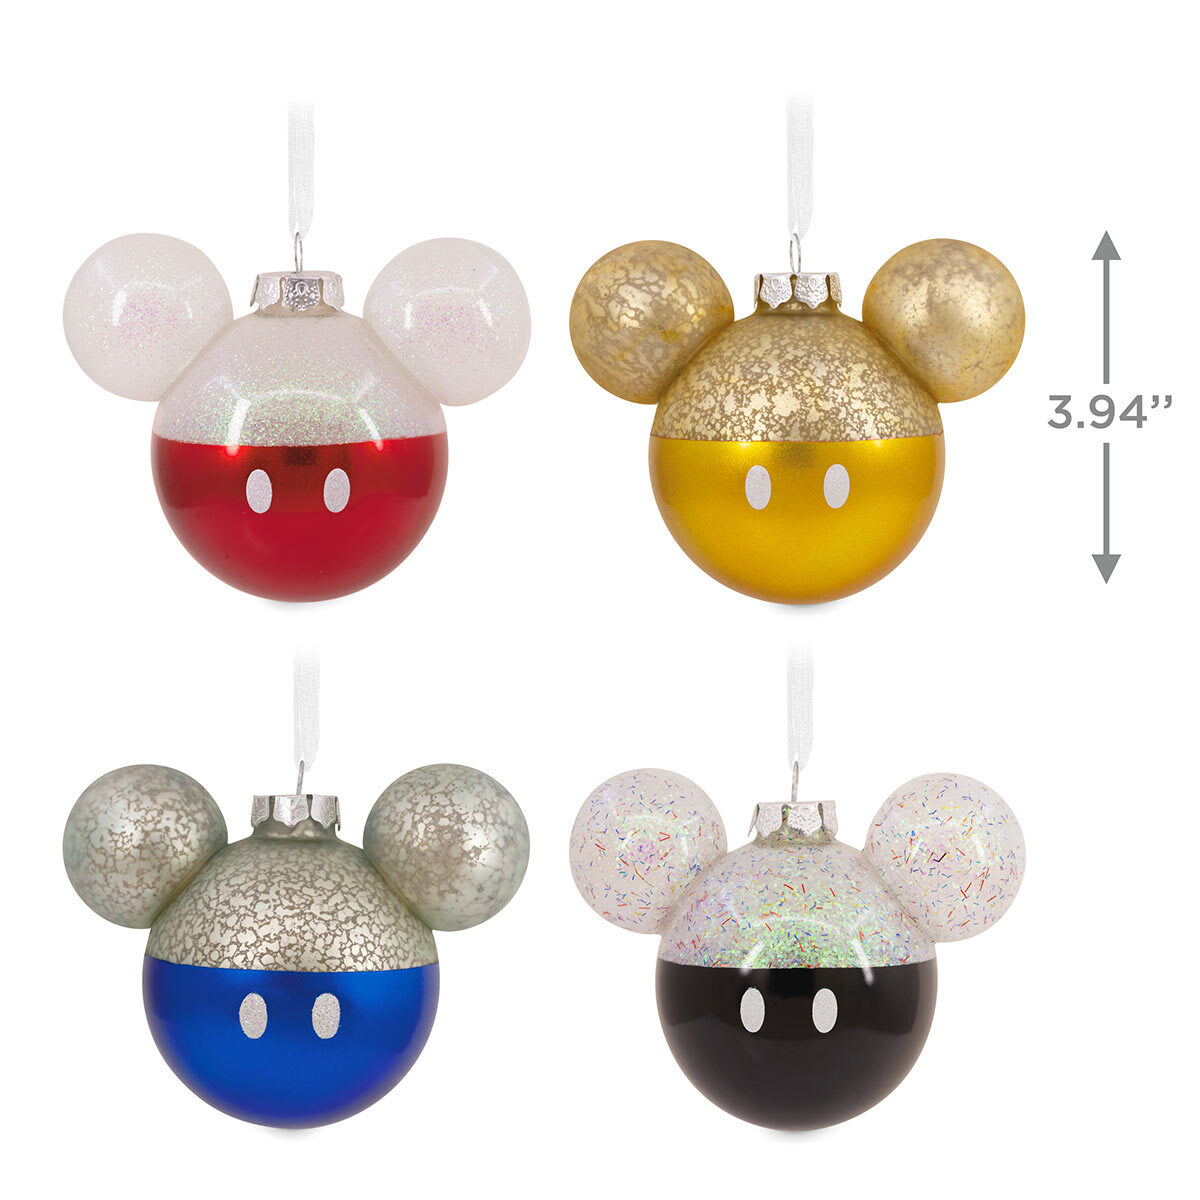 Buy Mickey Icon Ornaments Set of 4 Dimensions Image at Costco.co.uk